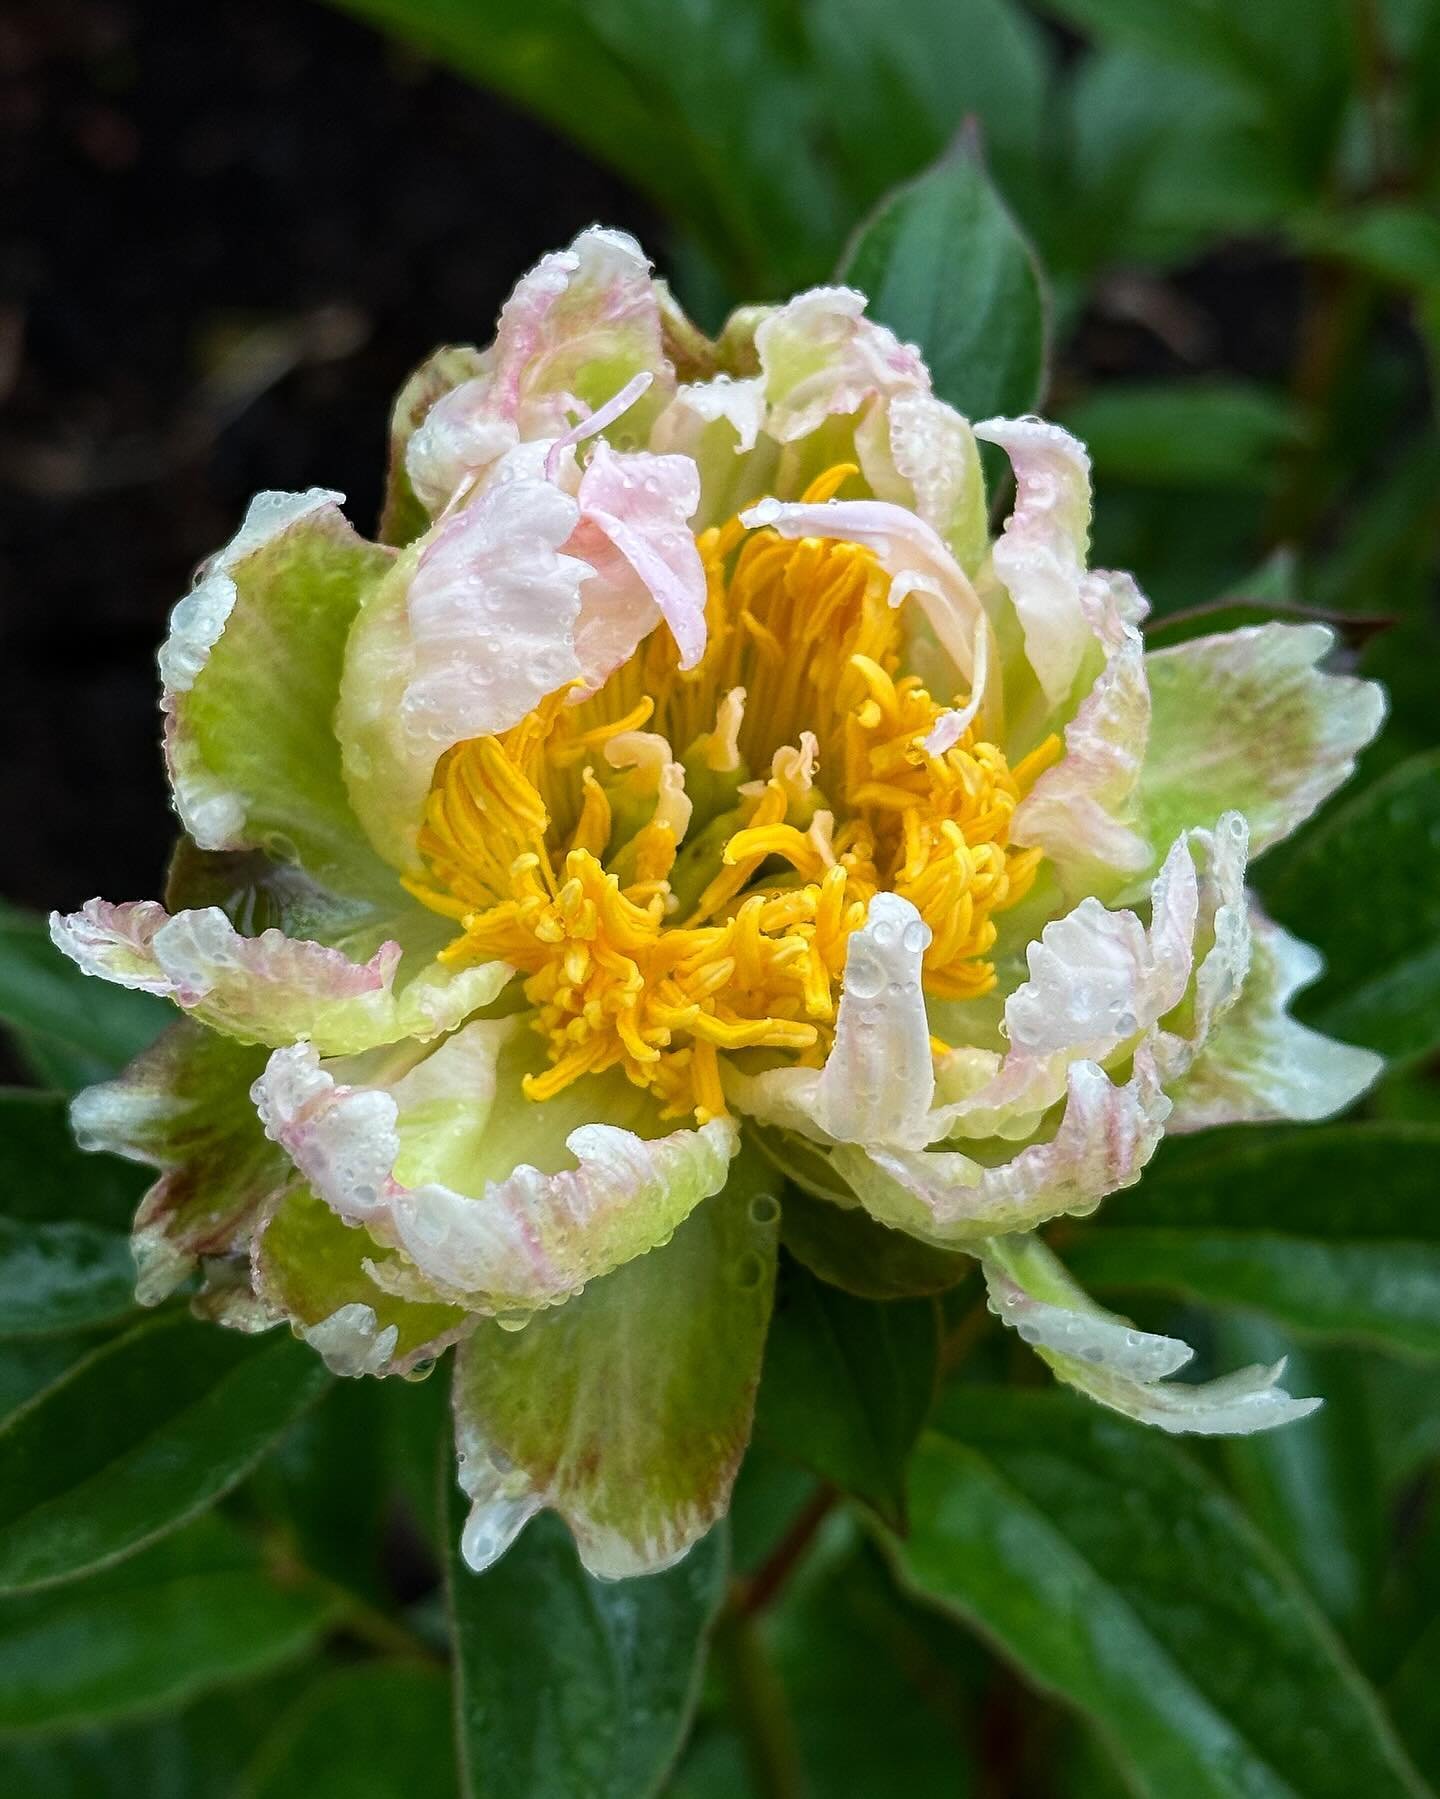 The first peony and other snippets from this week on the knoll. The intense greening is in full effect from the gardens to the shop and is especially striking on sodden spring days like this one.